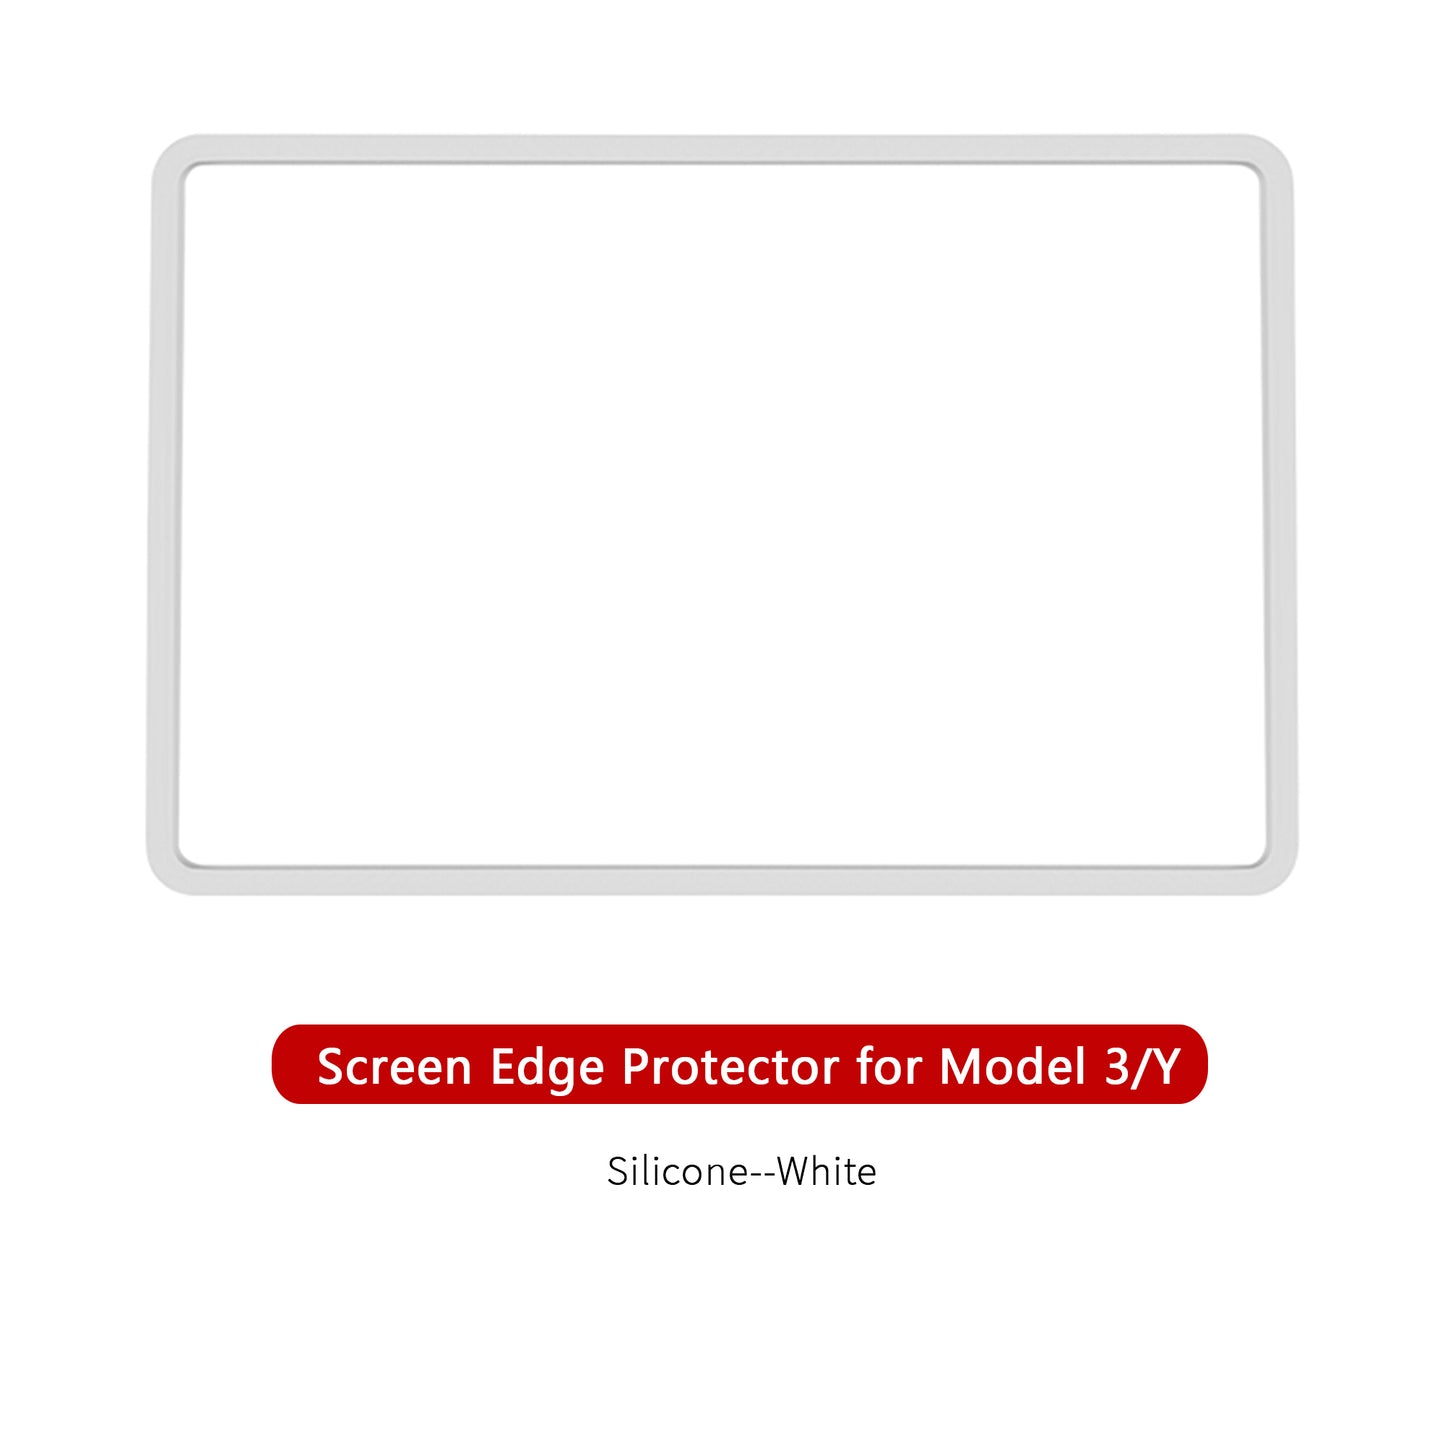 Compatible with all Model 3 and 2020-2023 Model Y arcoche accessories White Screen Edge Protector Cover Made of silicone rubber material much style and adds even more charm to your Tesla